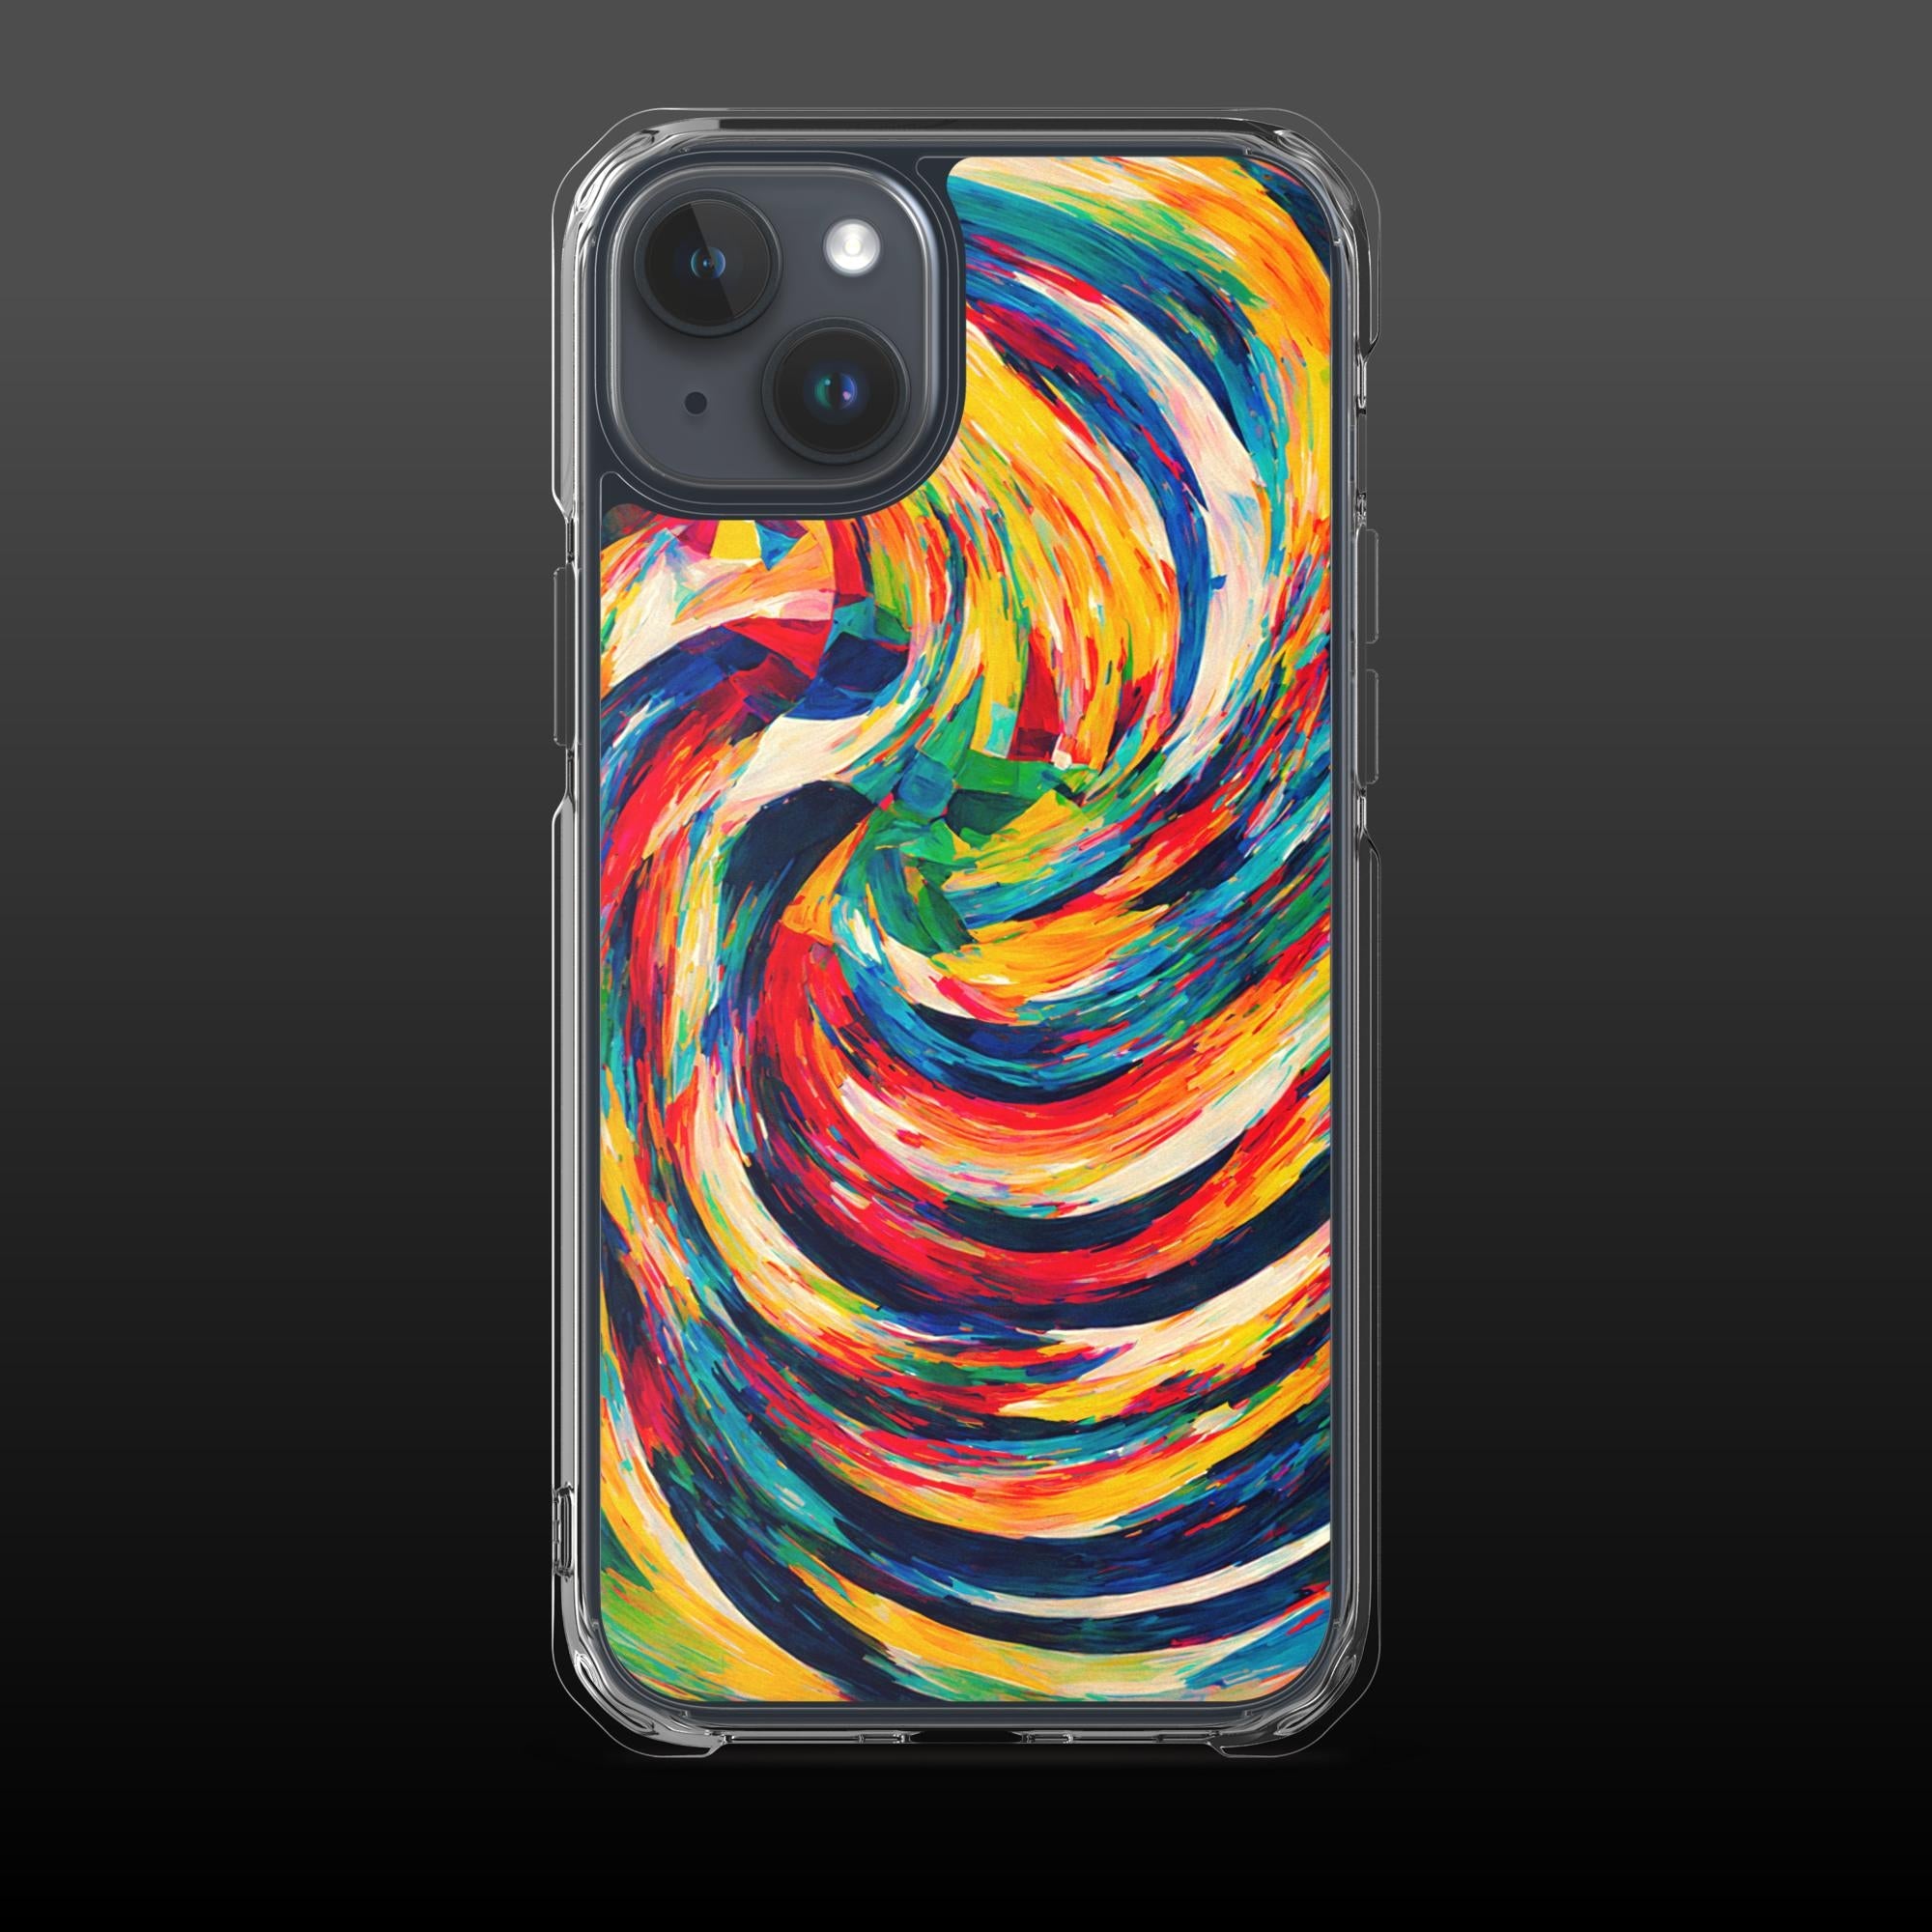 "Lack of doubt" clear iphone case - Clear iphone case - Ever colorful